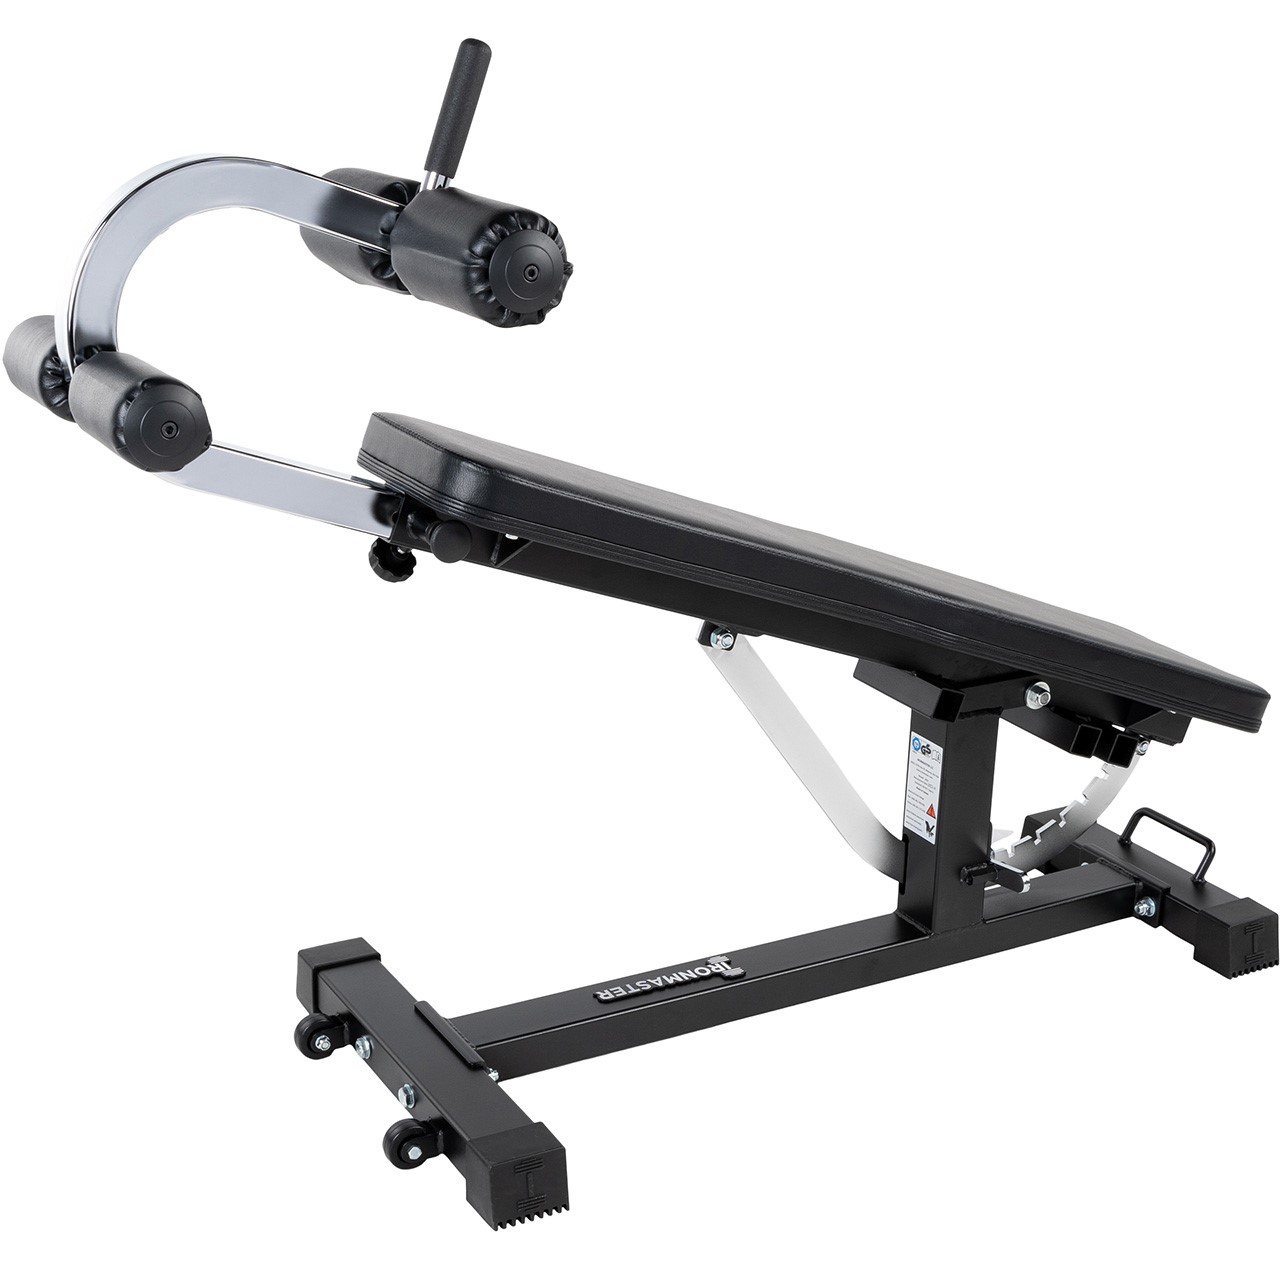 Ironmaster Crunch Situp Attachment (for Super Bench & Super Bench Pro)